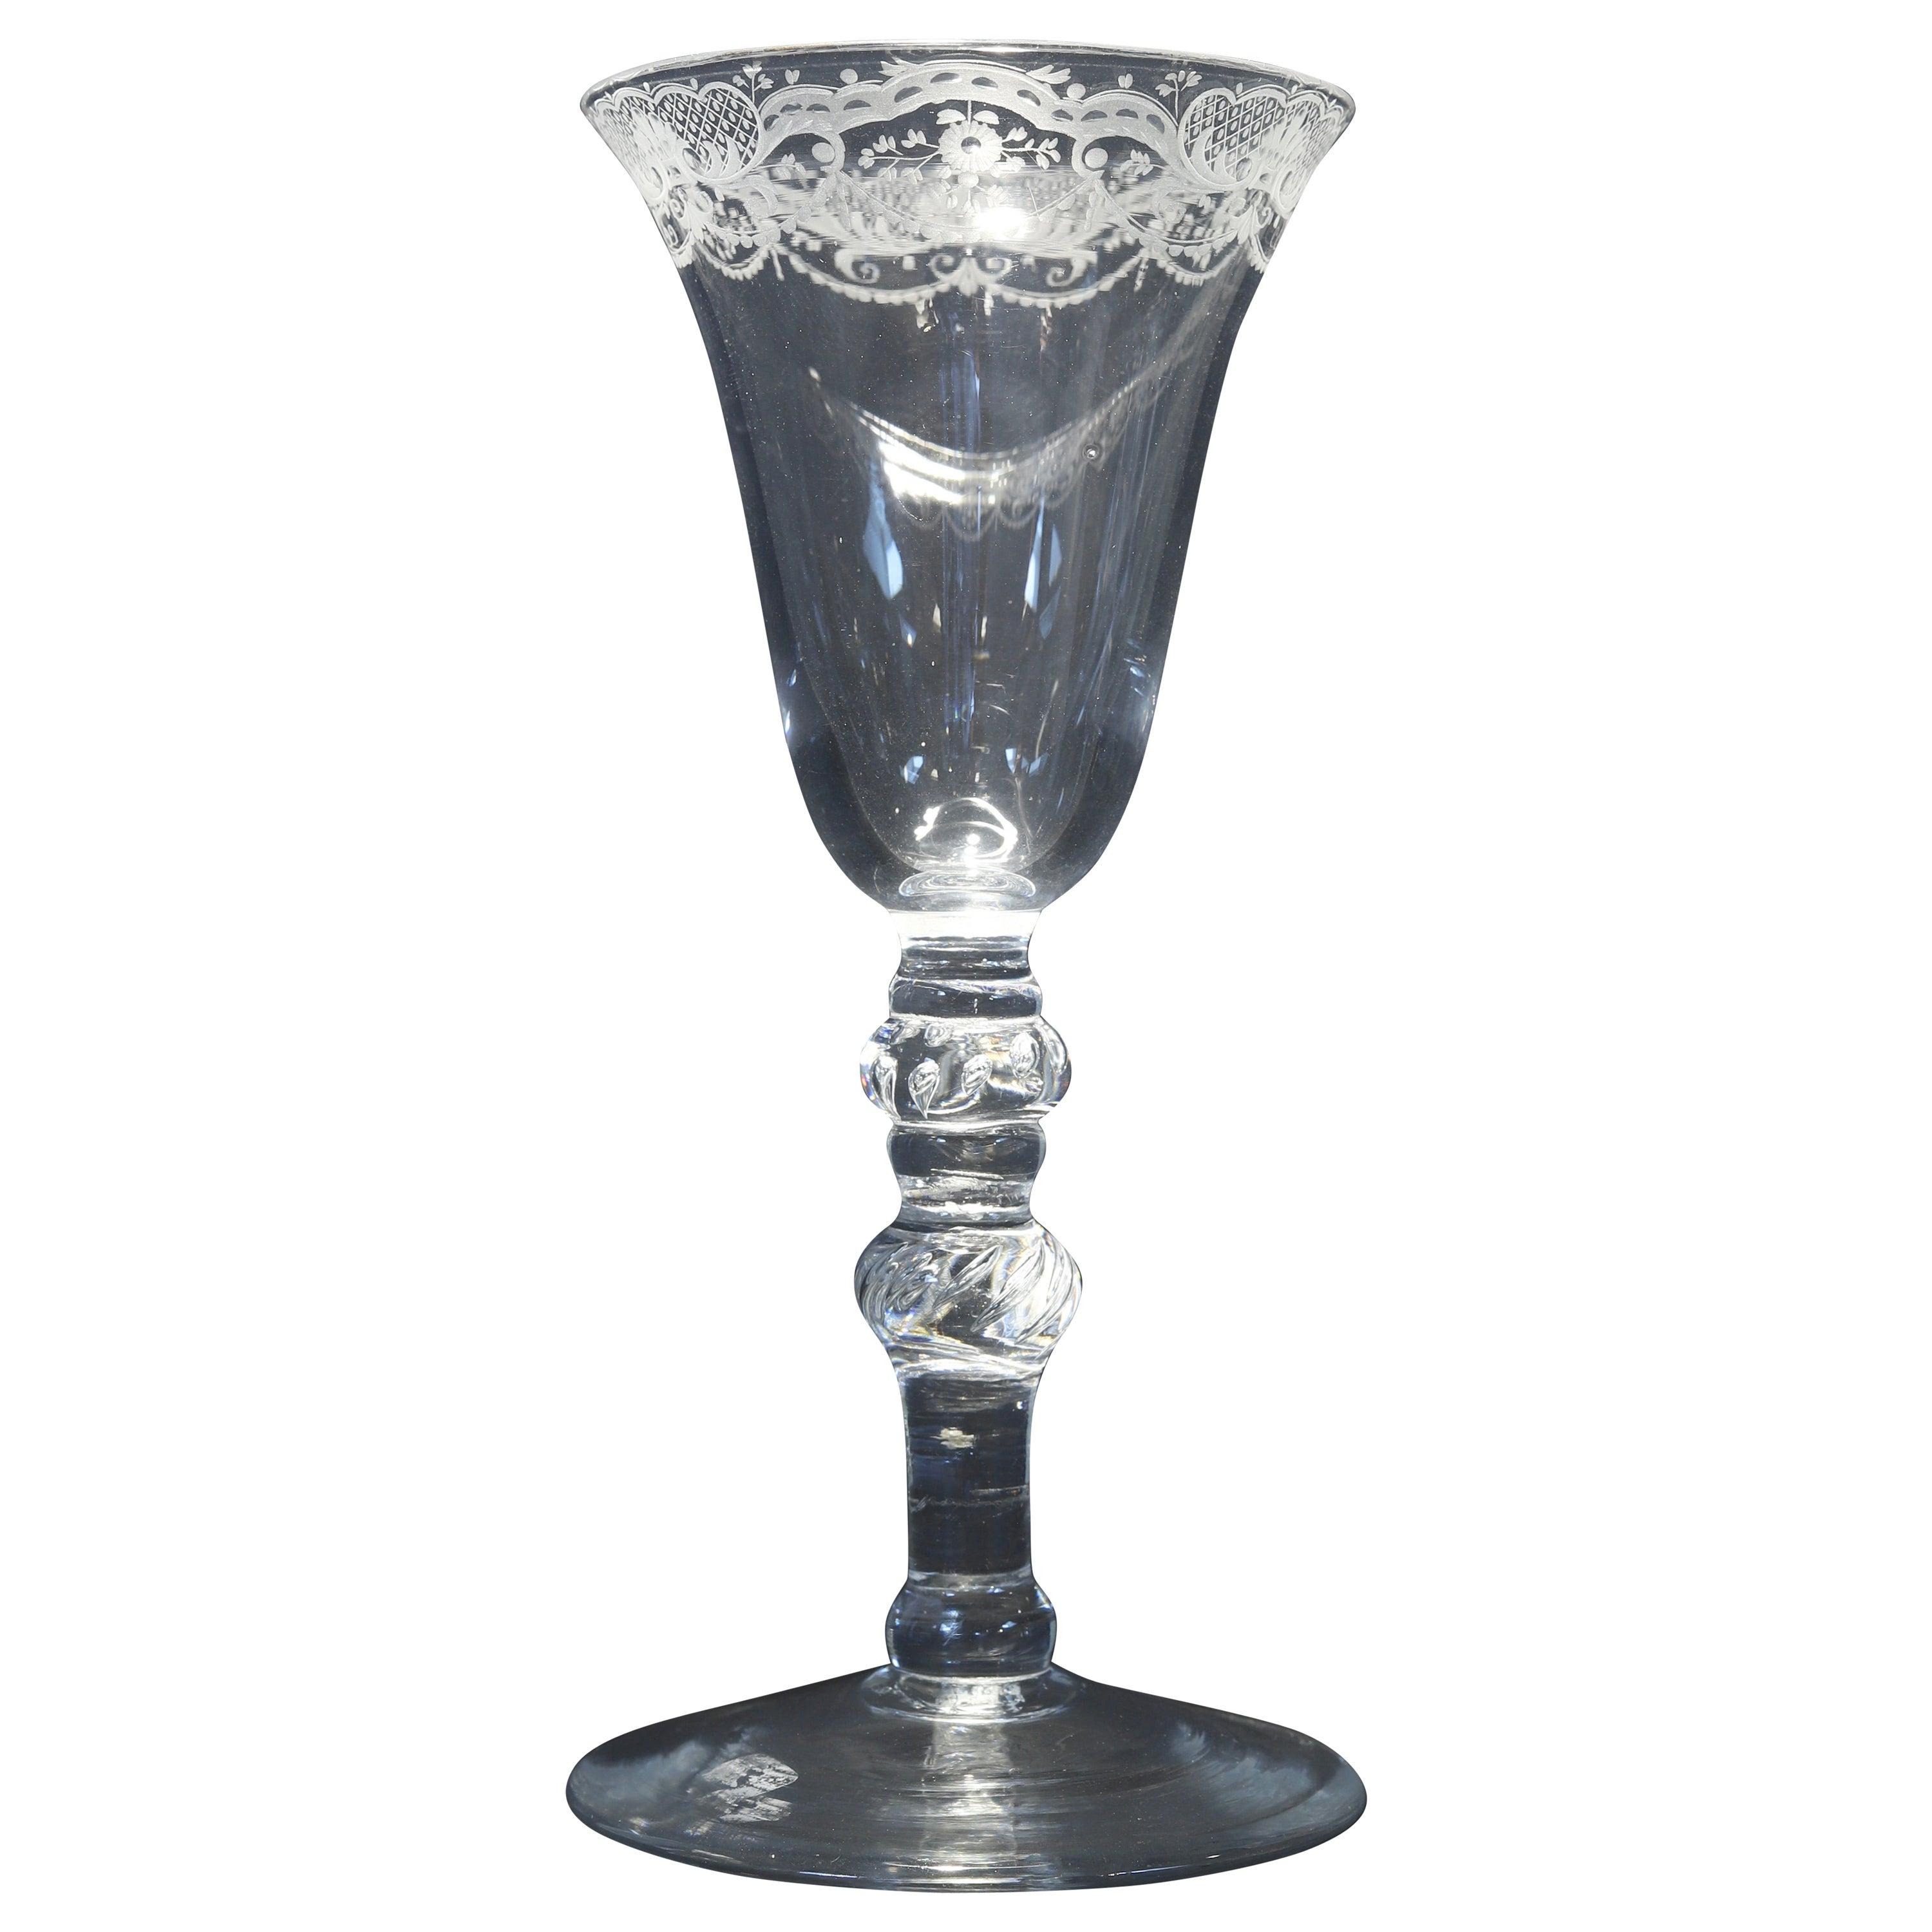 A Dutch Engraved Baluster Wine Glass, Mid 18th Century